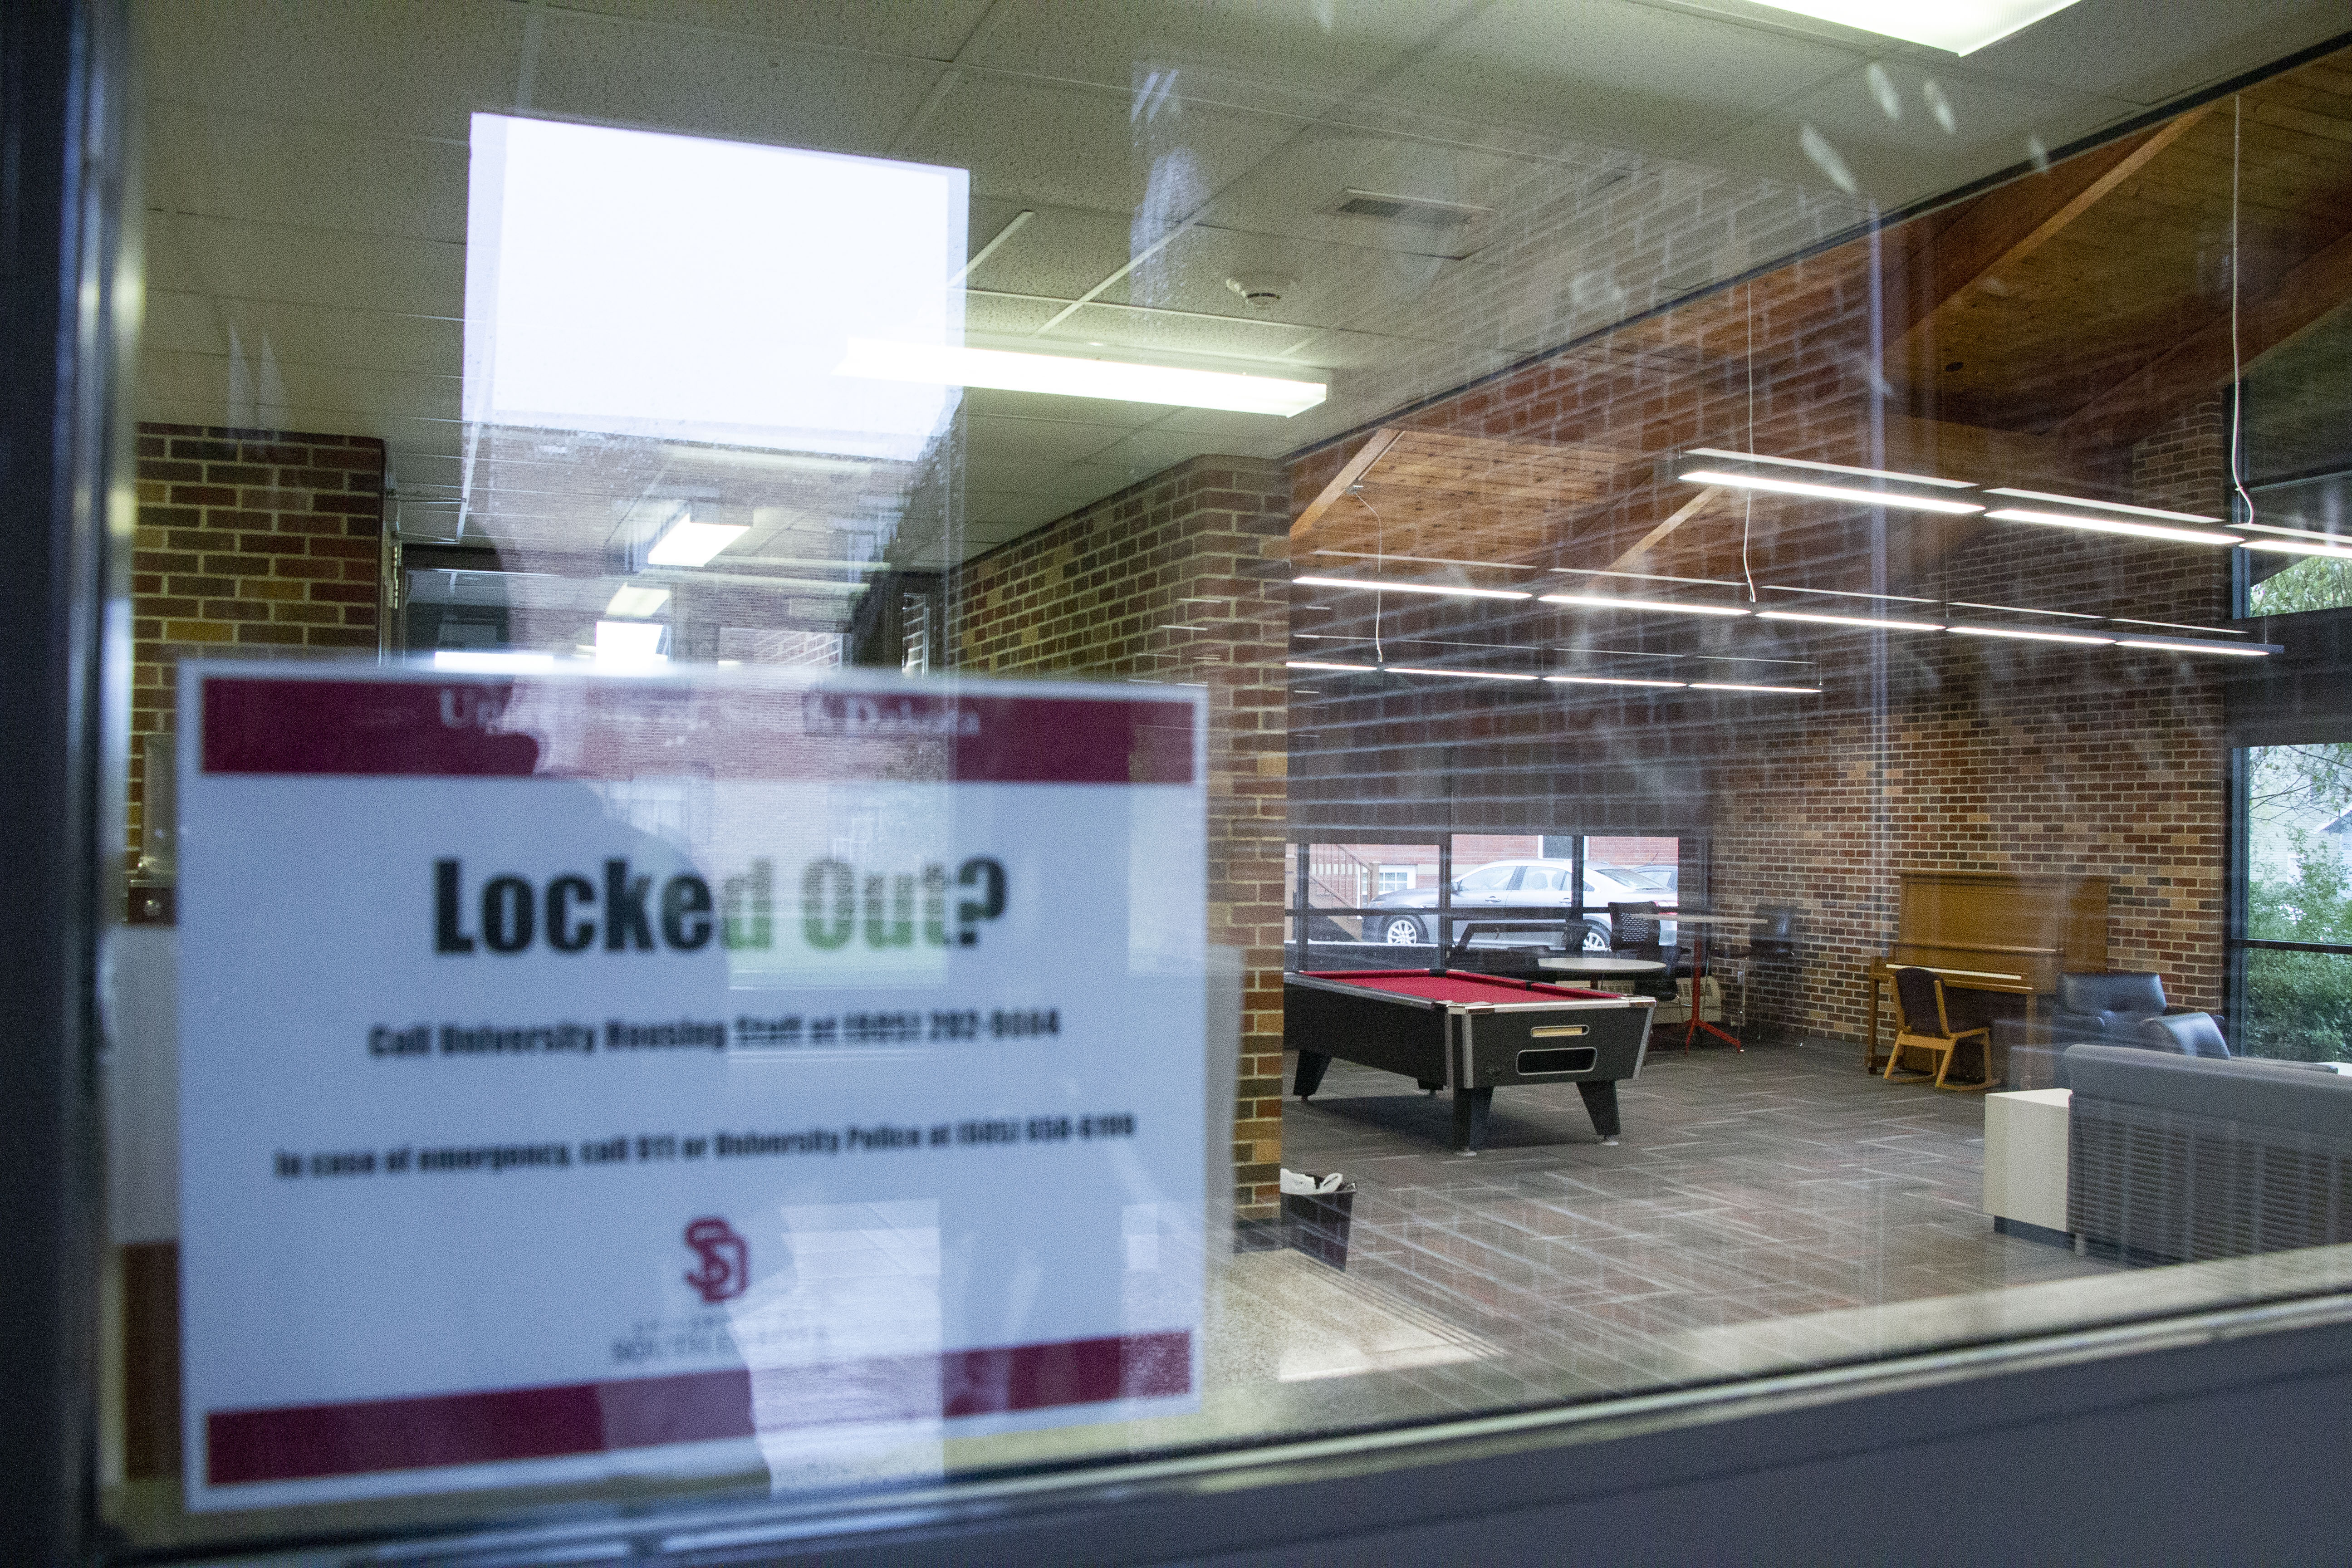 Brookman residence hall makes security changes, front doors now locked 24/7